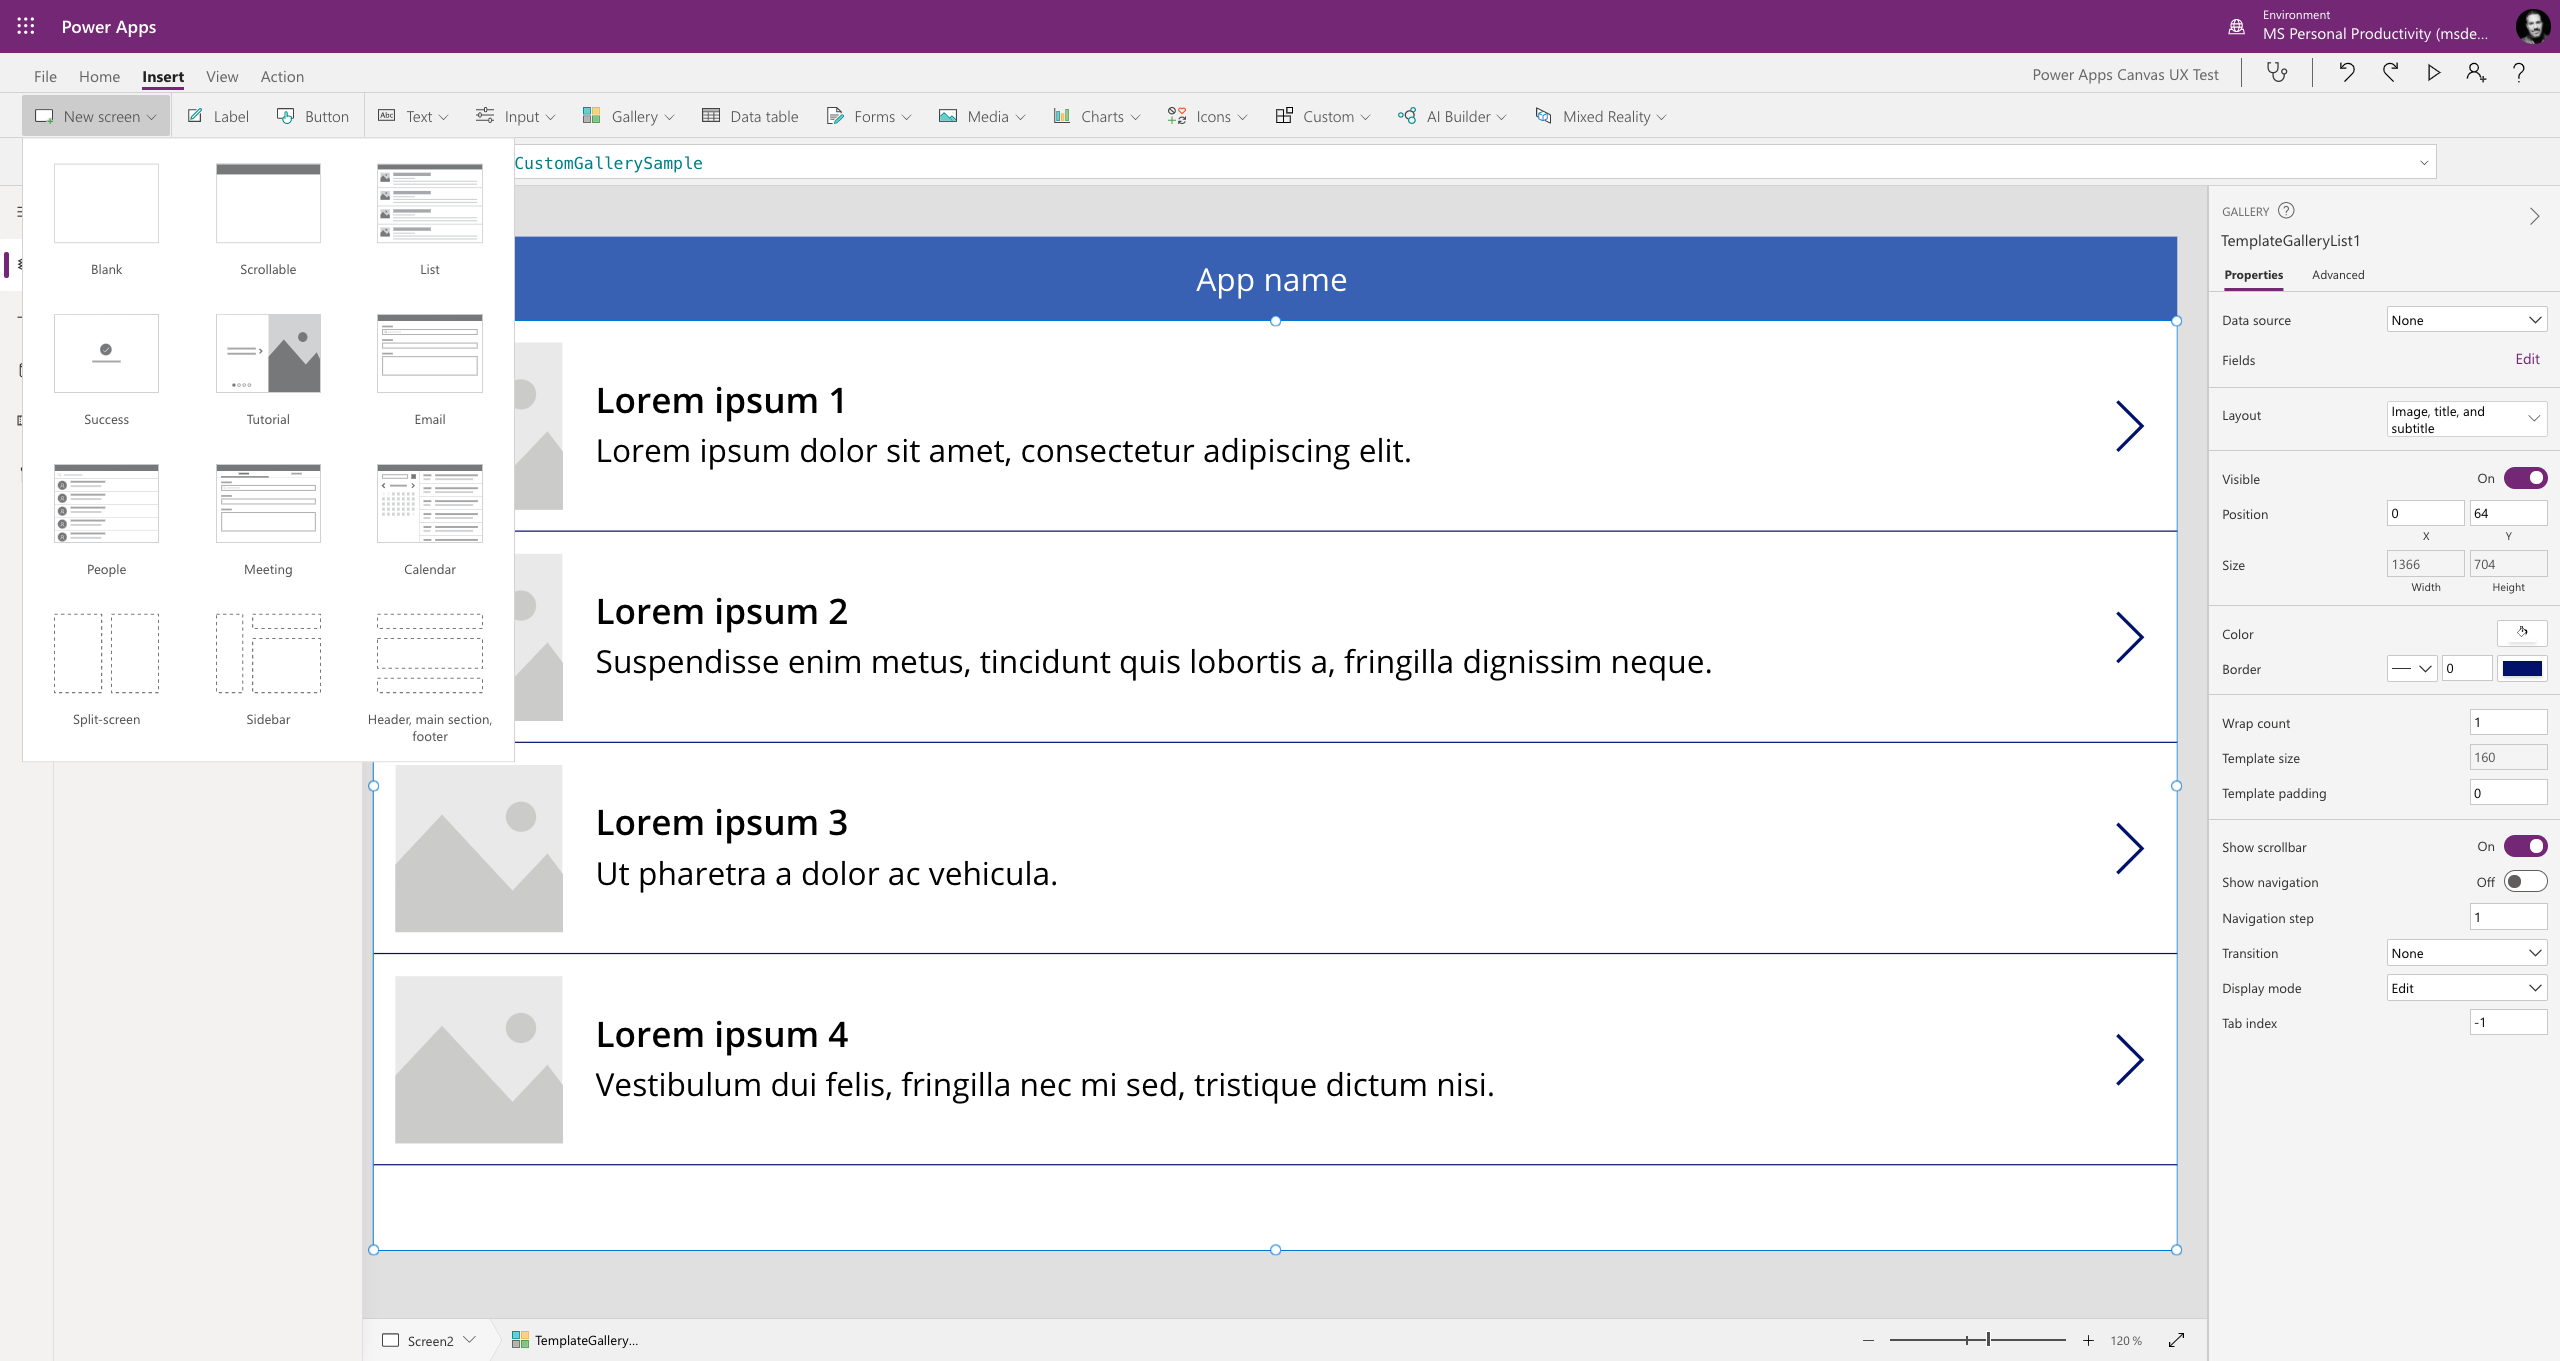 Add quick, preconfigured screens like lists, email forms, tutorials, and more through the New Screen drop-down.